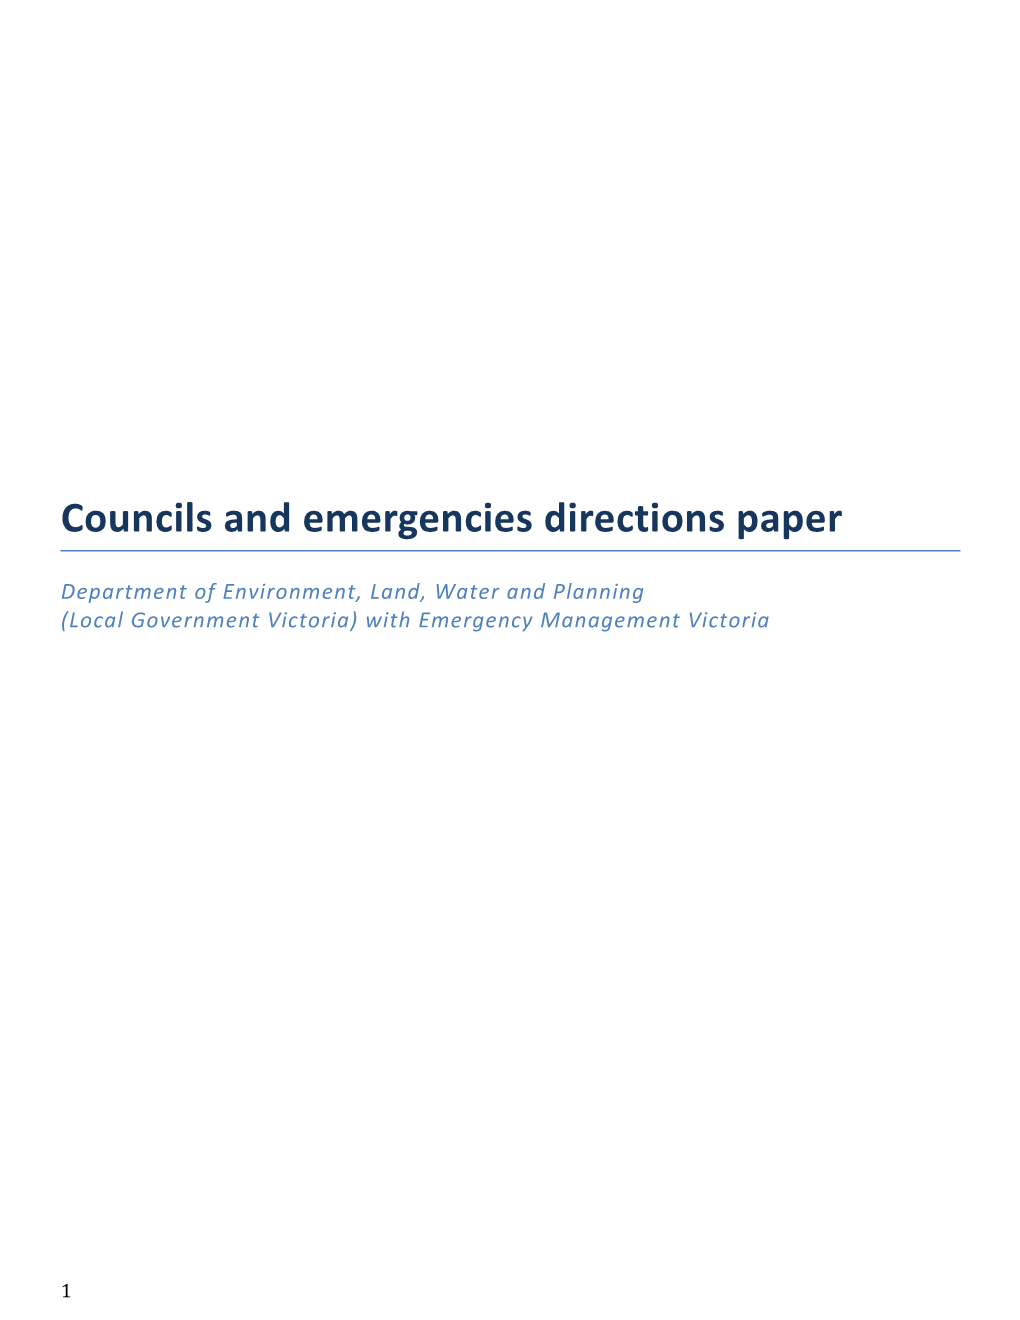 Councils and Emergencies Directions Paper